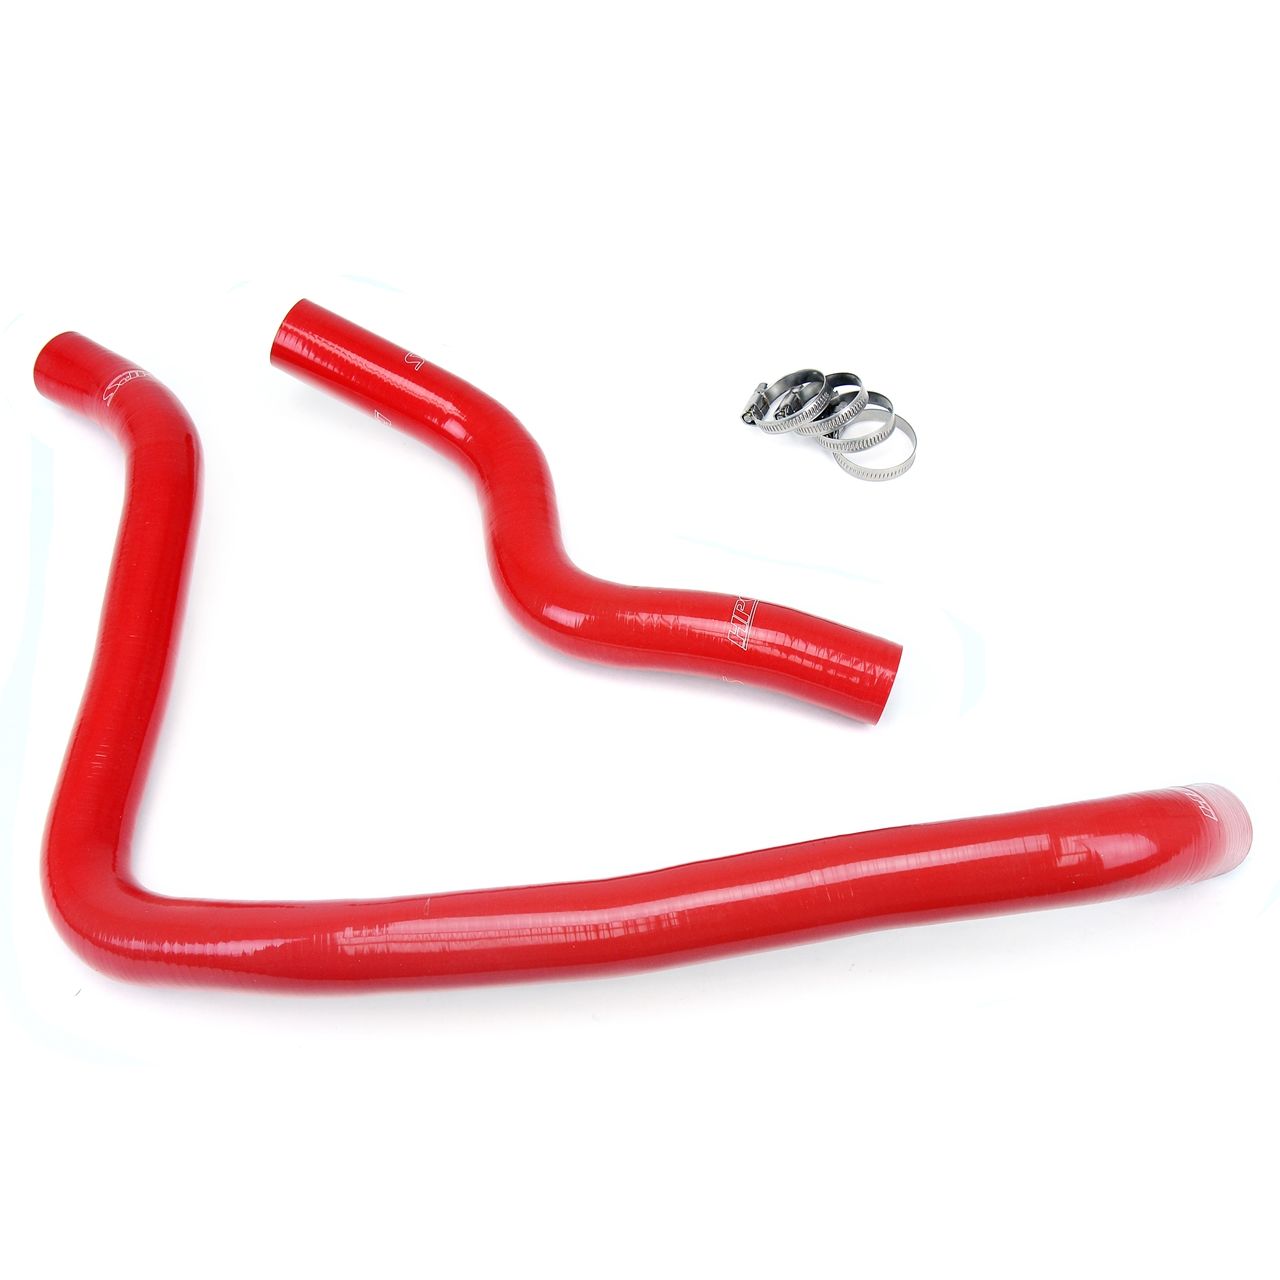 HPS Reinforced Red Silicone Radiator Hose Kit Coolant for Honda 98-02 Accord 2.3L 4Cyl